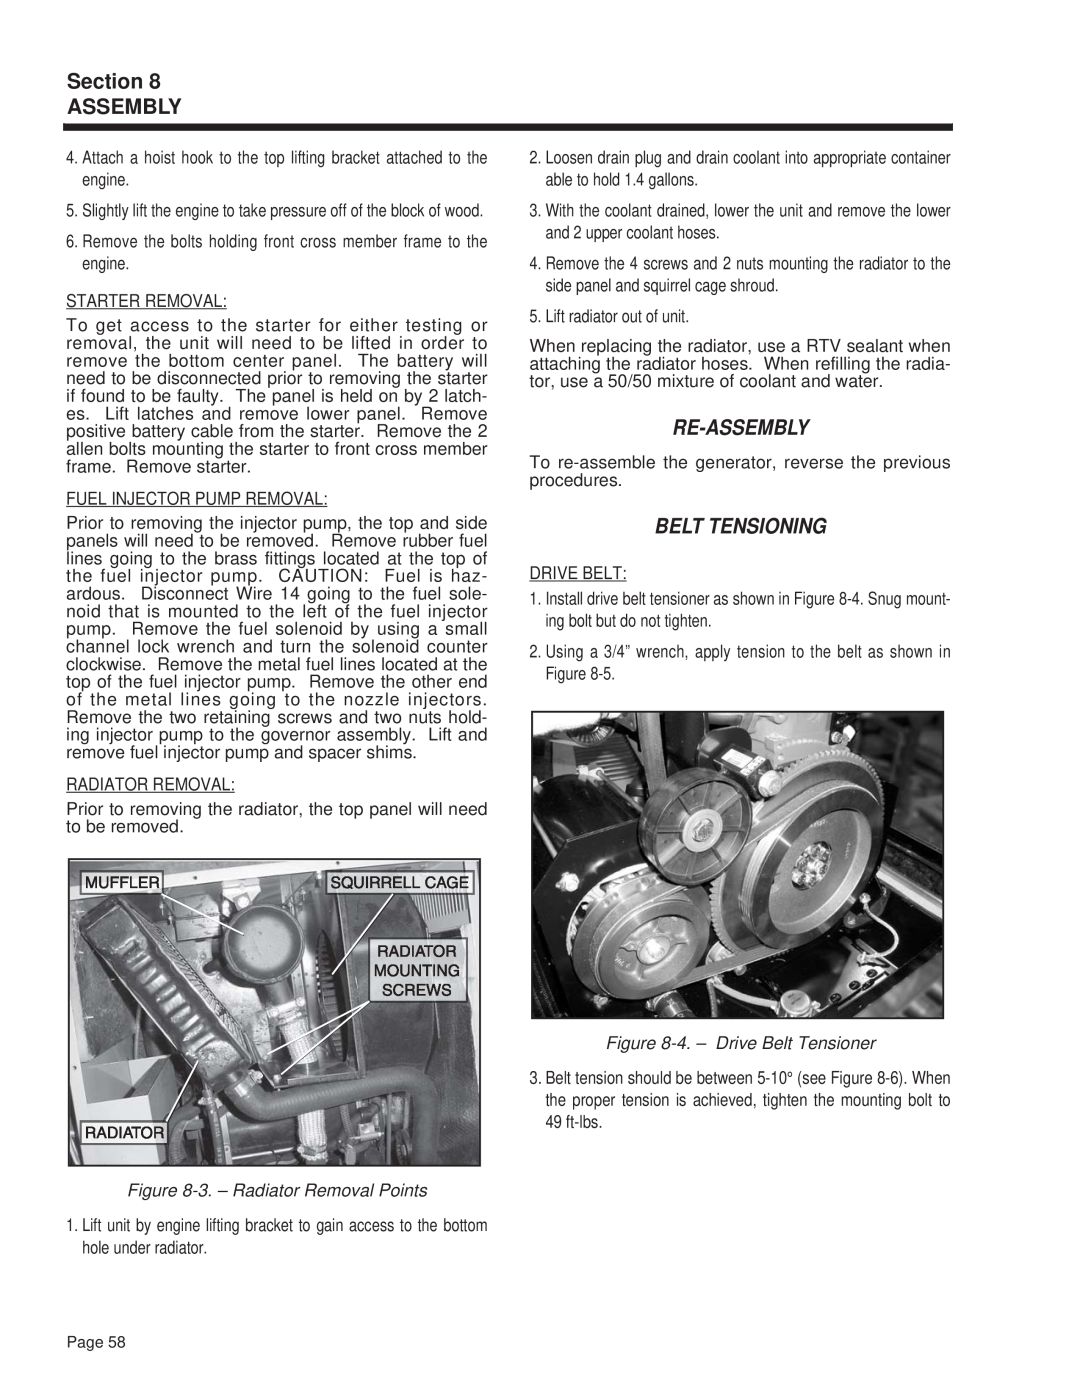 Guardian Technologies 4270 manual Re-Assembly, Belt Tensioning, 3. - Radiator Removal Points, 4. - Drive Belt Tensioner 